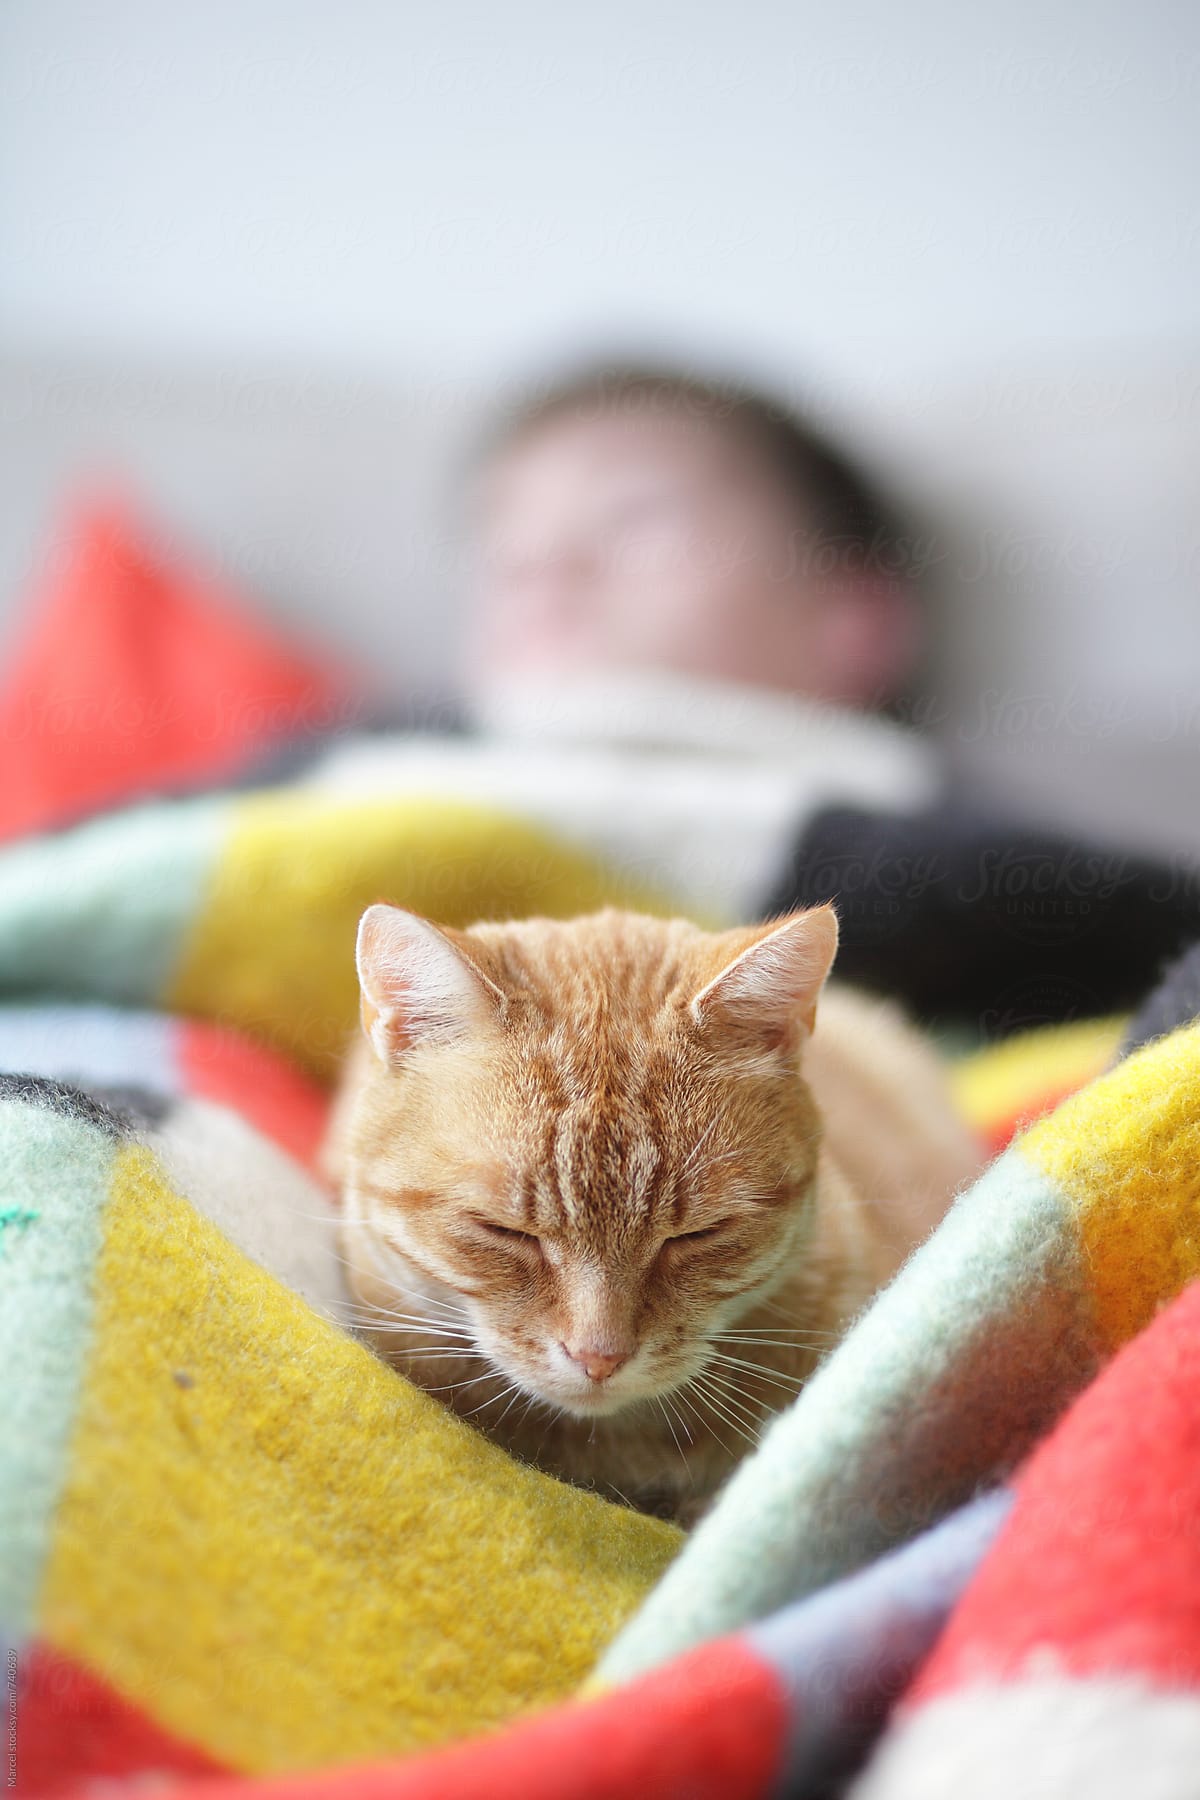 Cat and man sleeping on a couch